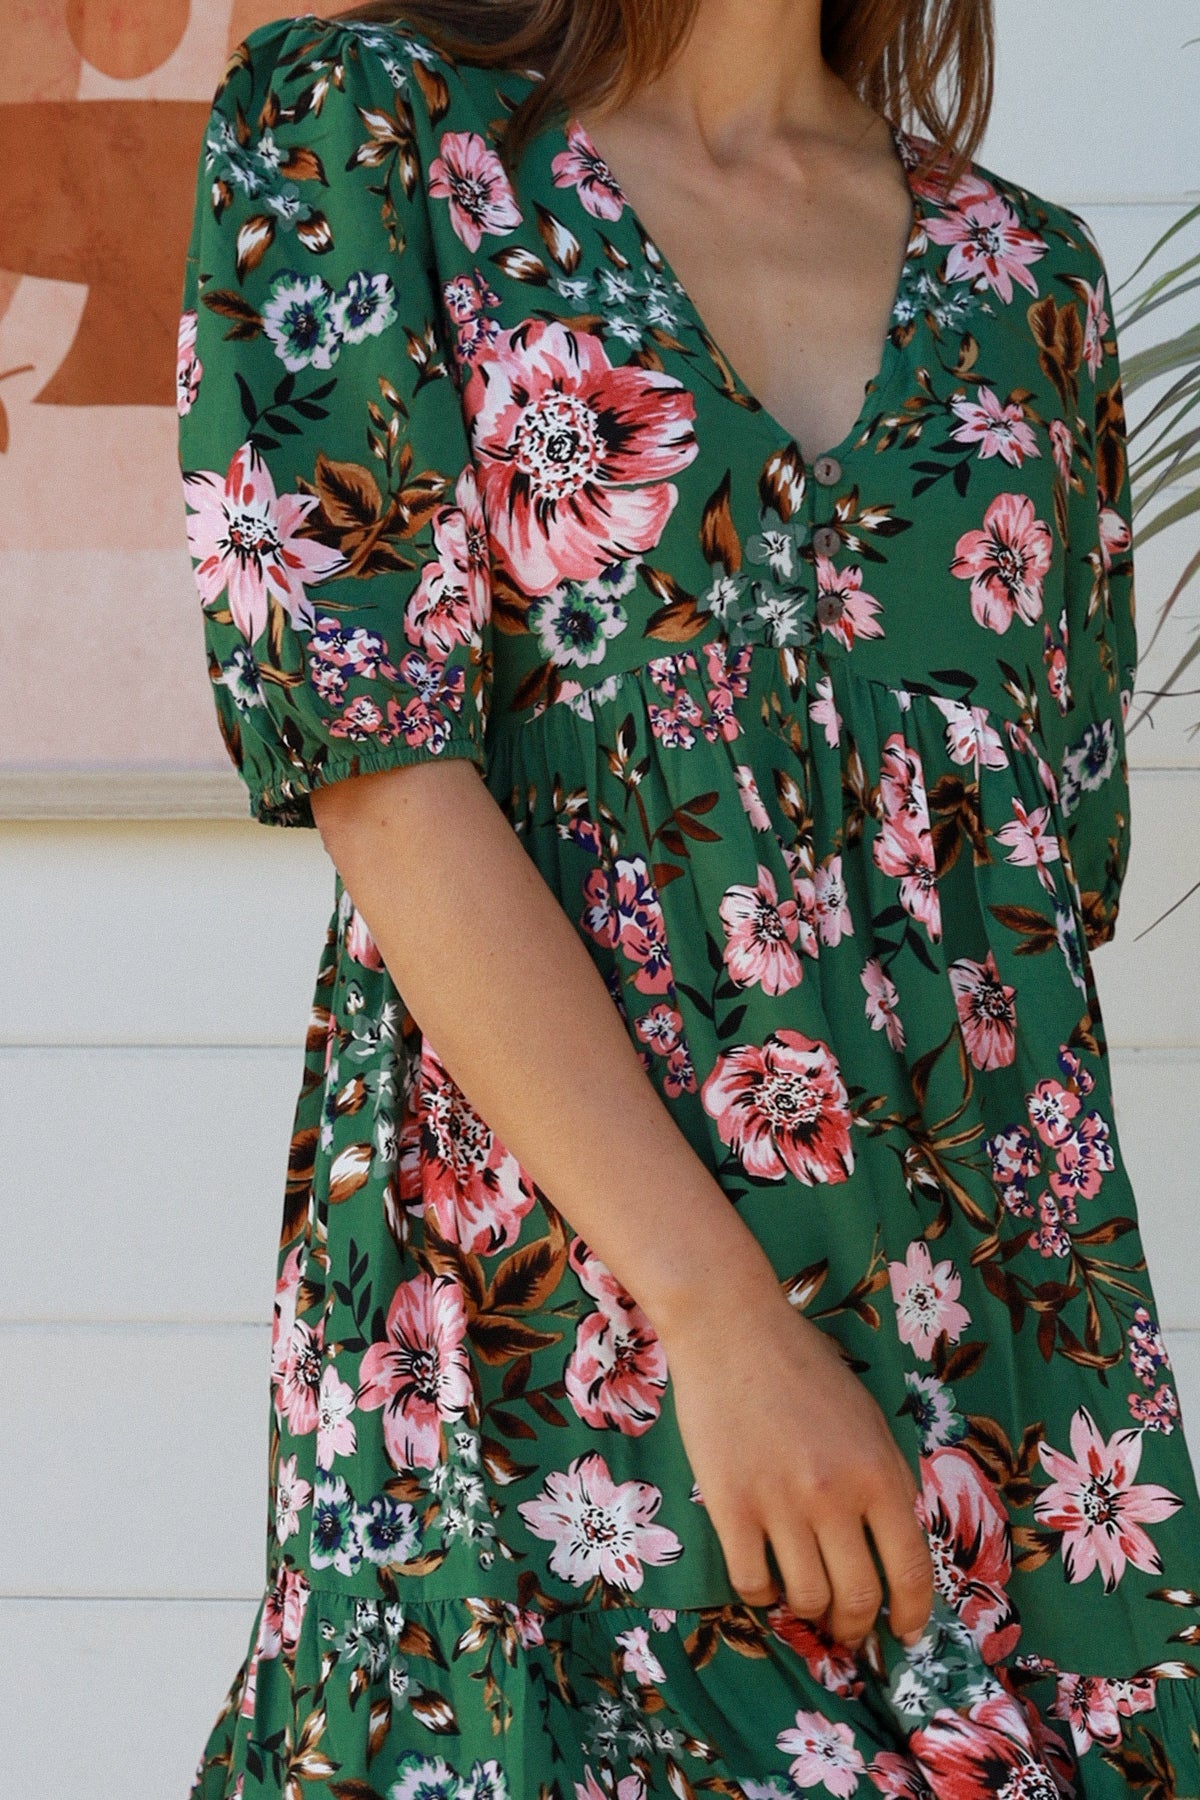 The Daisy Mini Dress is here to bring a bit of sunshine and a lot of chic style to your wardrobe! Featuring a V-neckline, elasticated sleeves, button detail, and a tiered style, this dress is ready to bring some flower power to your summer look!